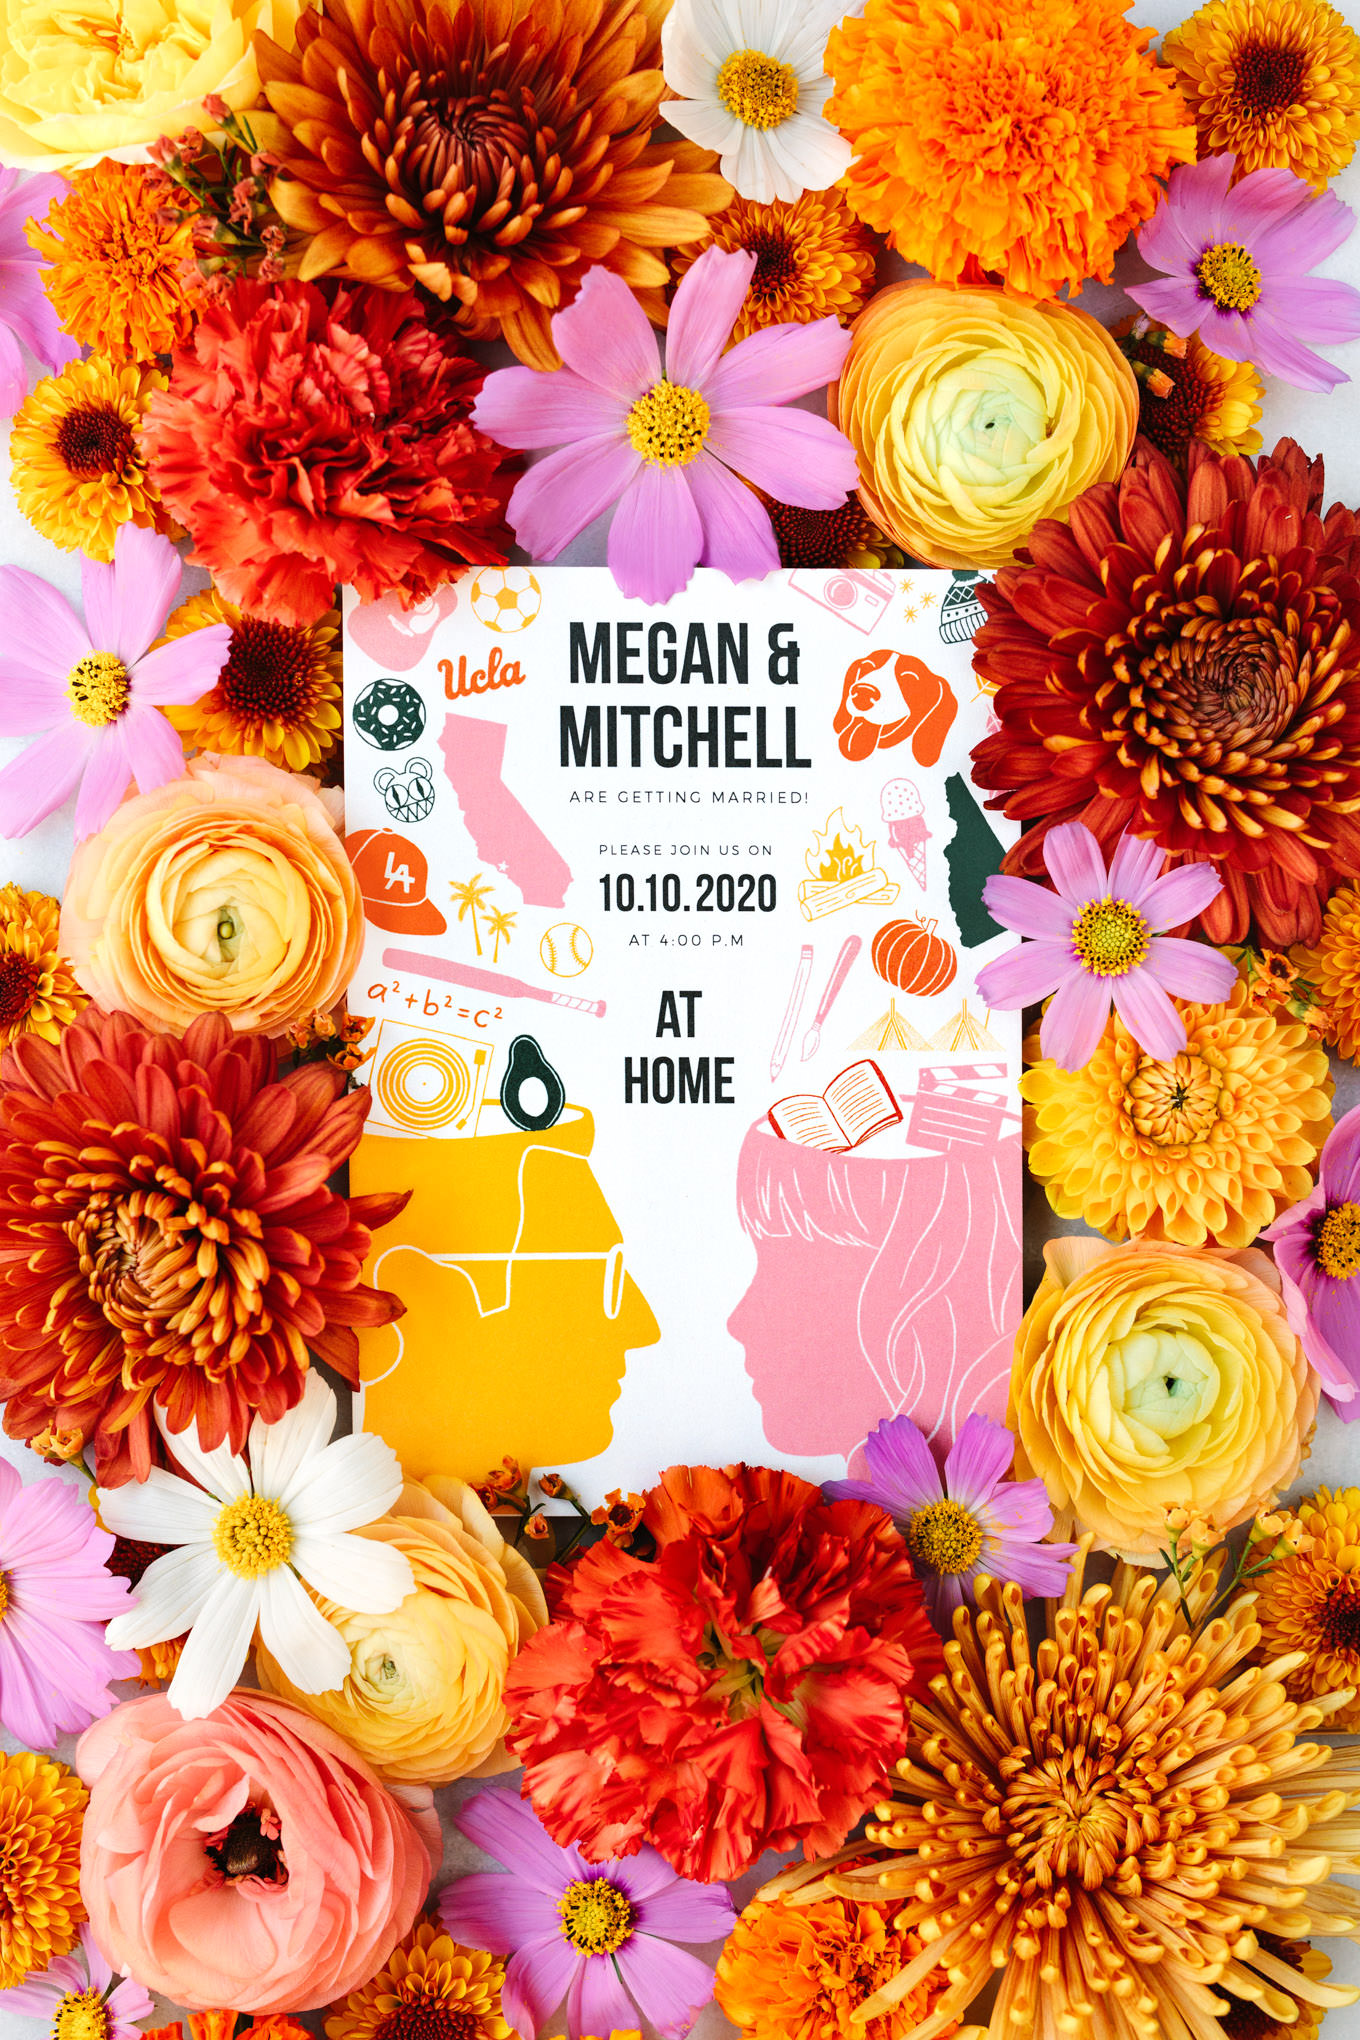 Wedding invitation designed by Megan Roy surrounded by colorful flowers | Engagement, elopement, and wedding photography roundup of Mary Costa’s favorite images from 2020 | Colorful and elevated photography for fun-loving couples in Southern California | #2020wedding #weddinginvitation #weddinginvite #weddingphotography #microwedding   Source: Mary Costa Photography | Los Angeles